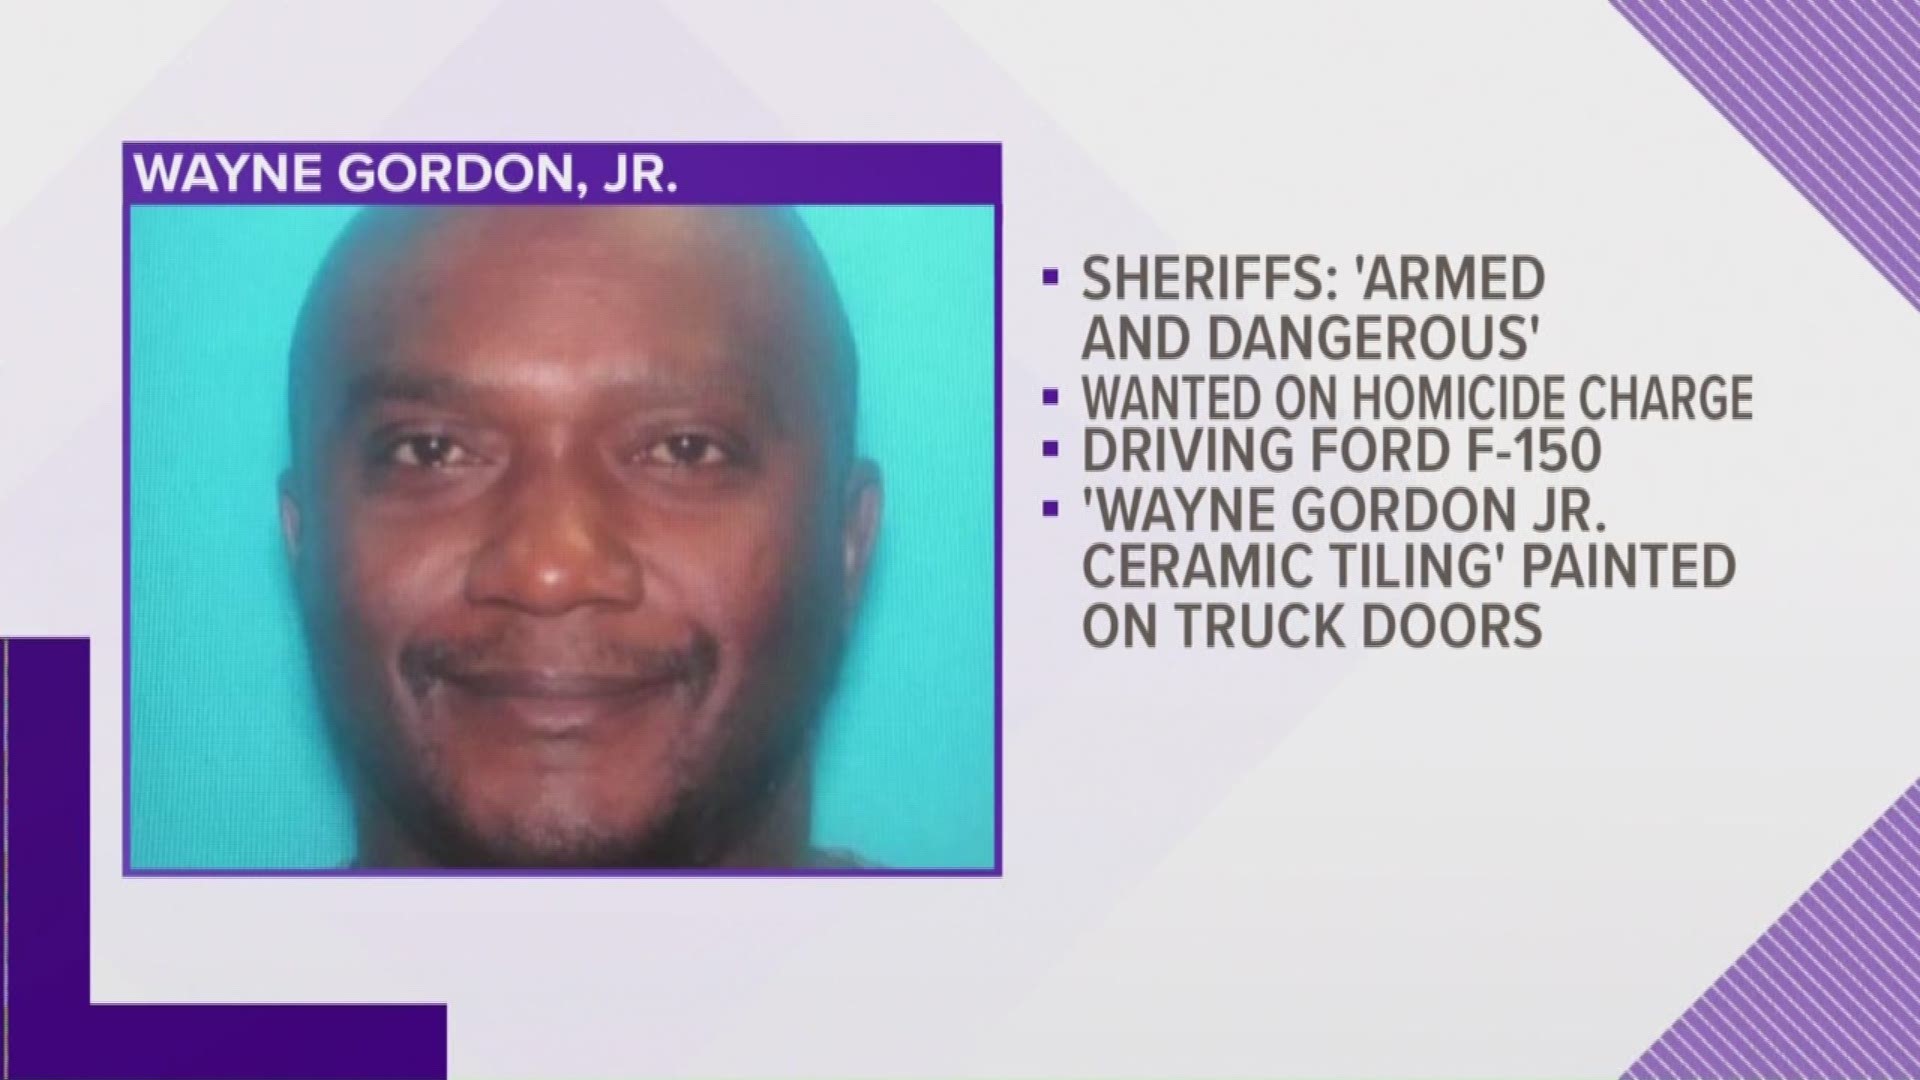 The Montgomery County Sheriff's Office is looking for Wayne Gordon Jr. The say he a possible suspect in a deadly shooting case. He allegedly drove away from the scene in truck with his name painted on the side.